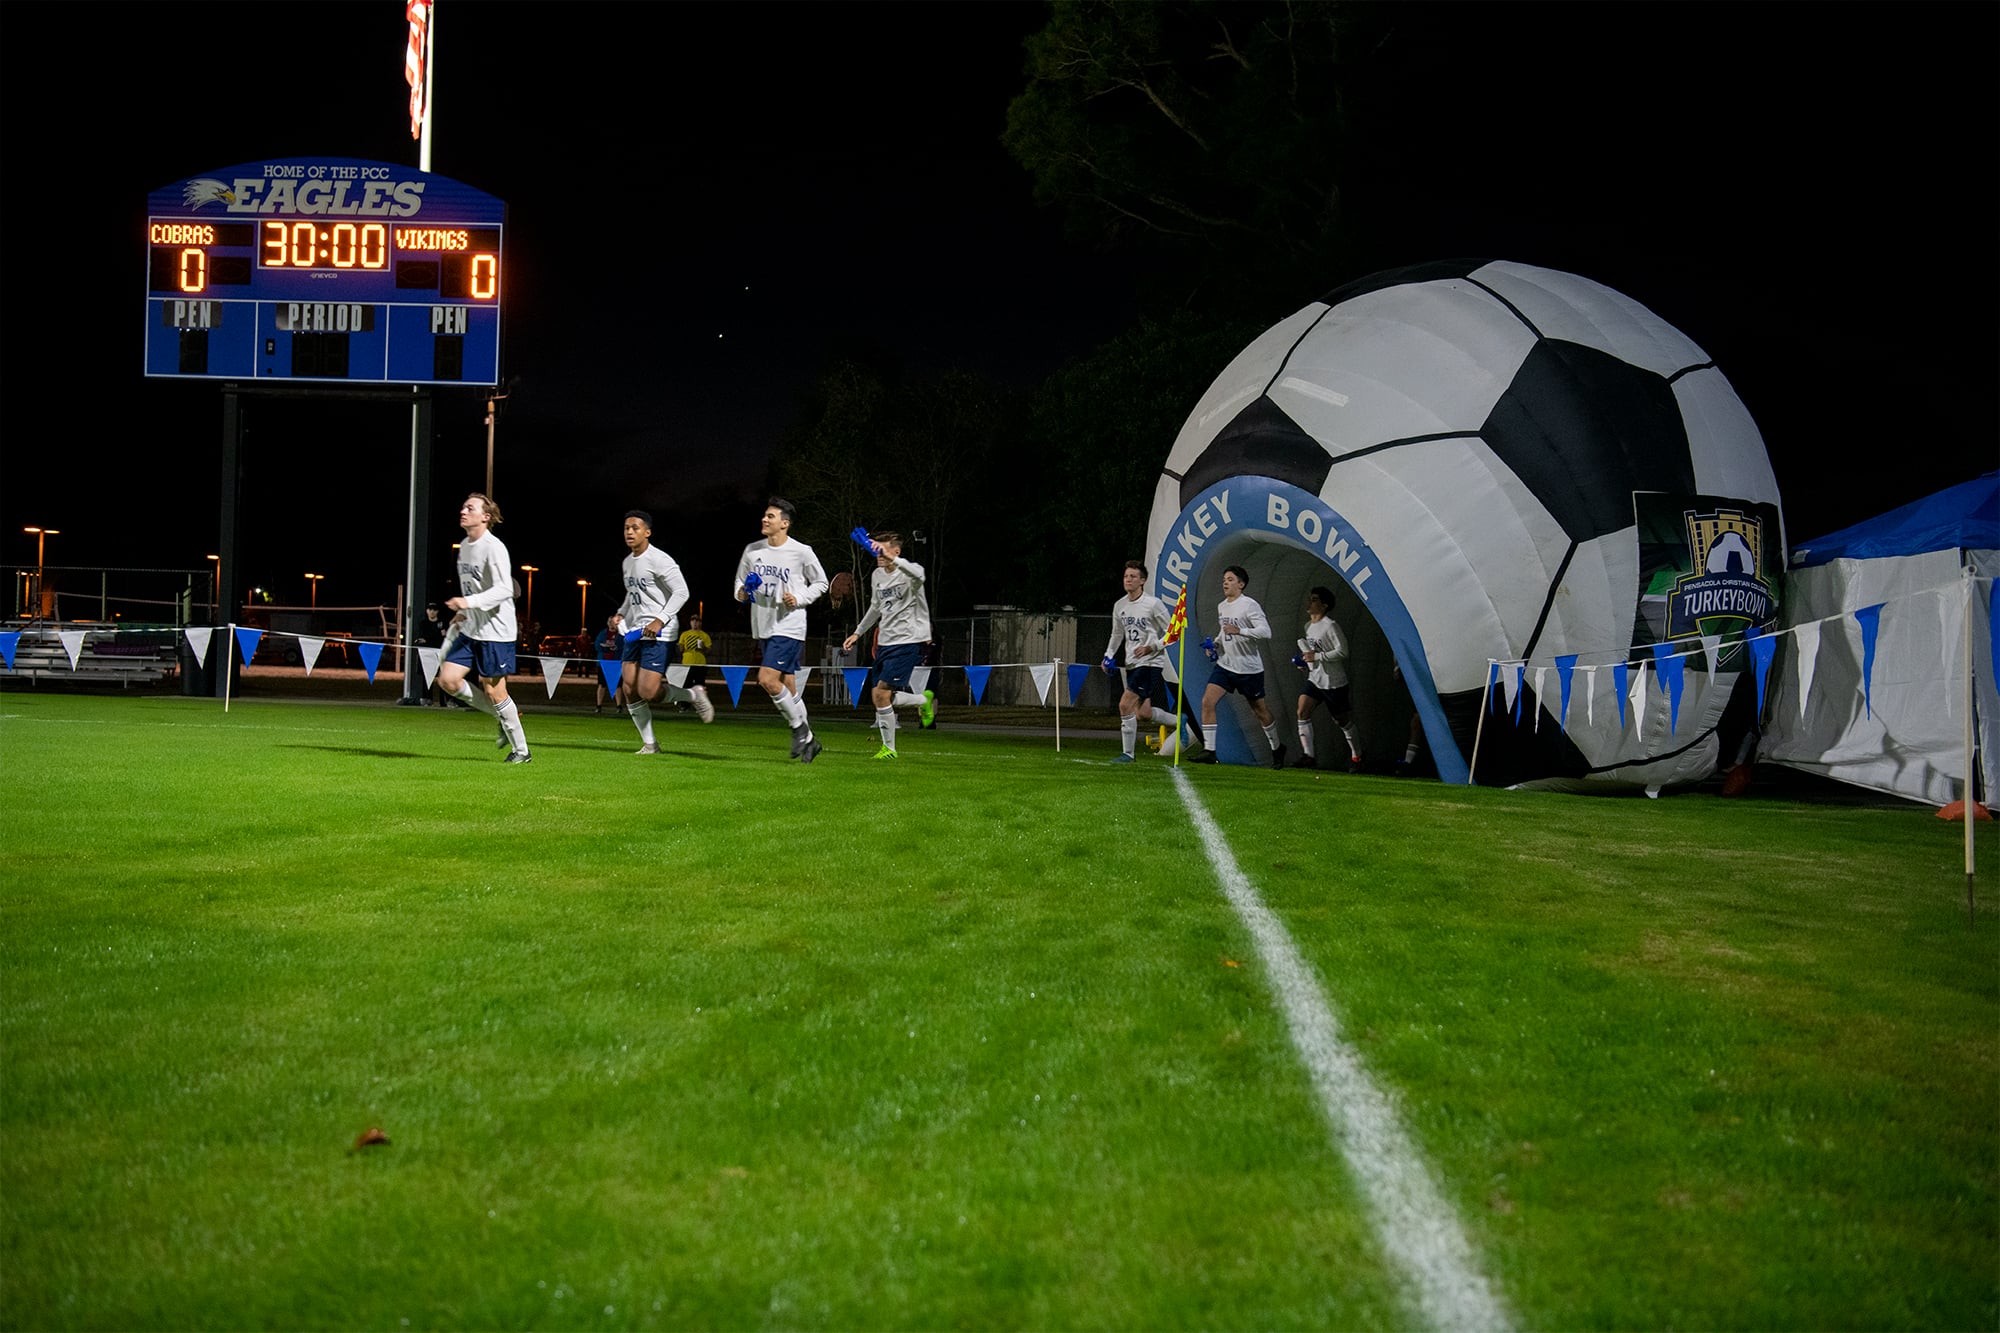 Cobra players run onto the field through the large inflatable soccer ball tunnel